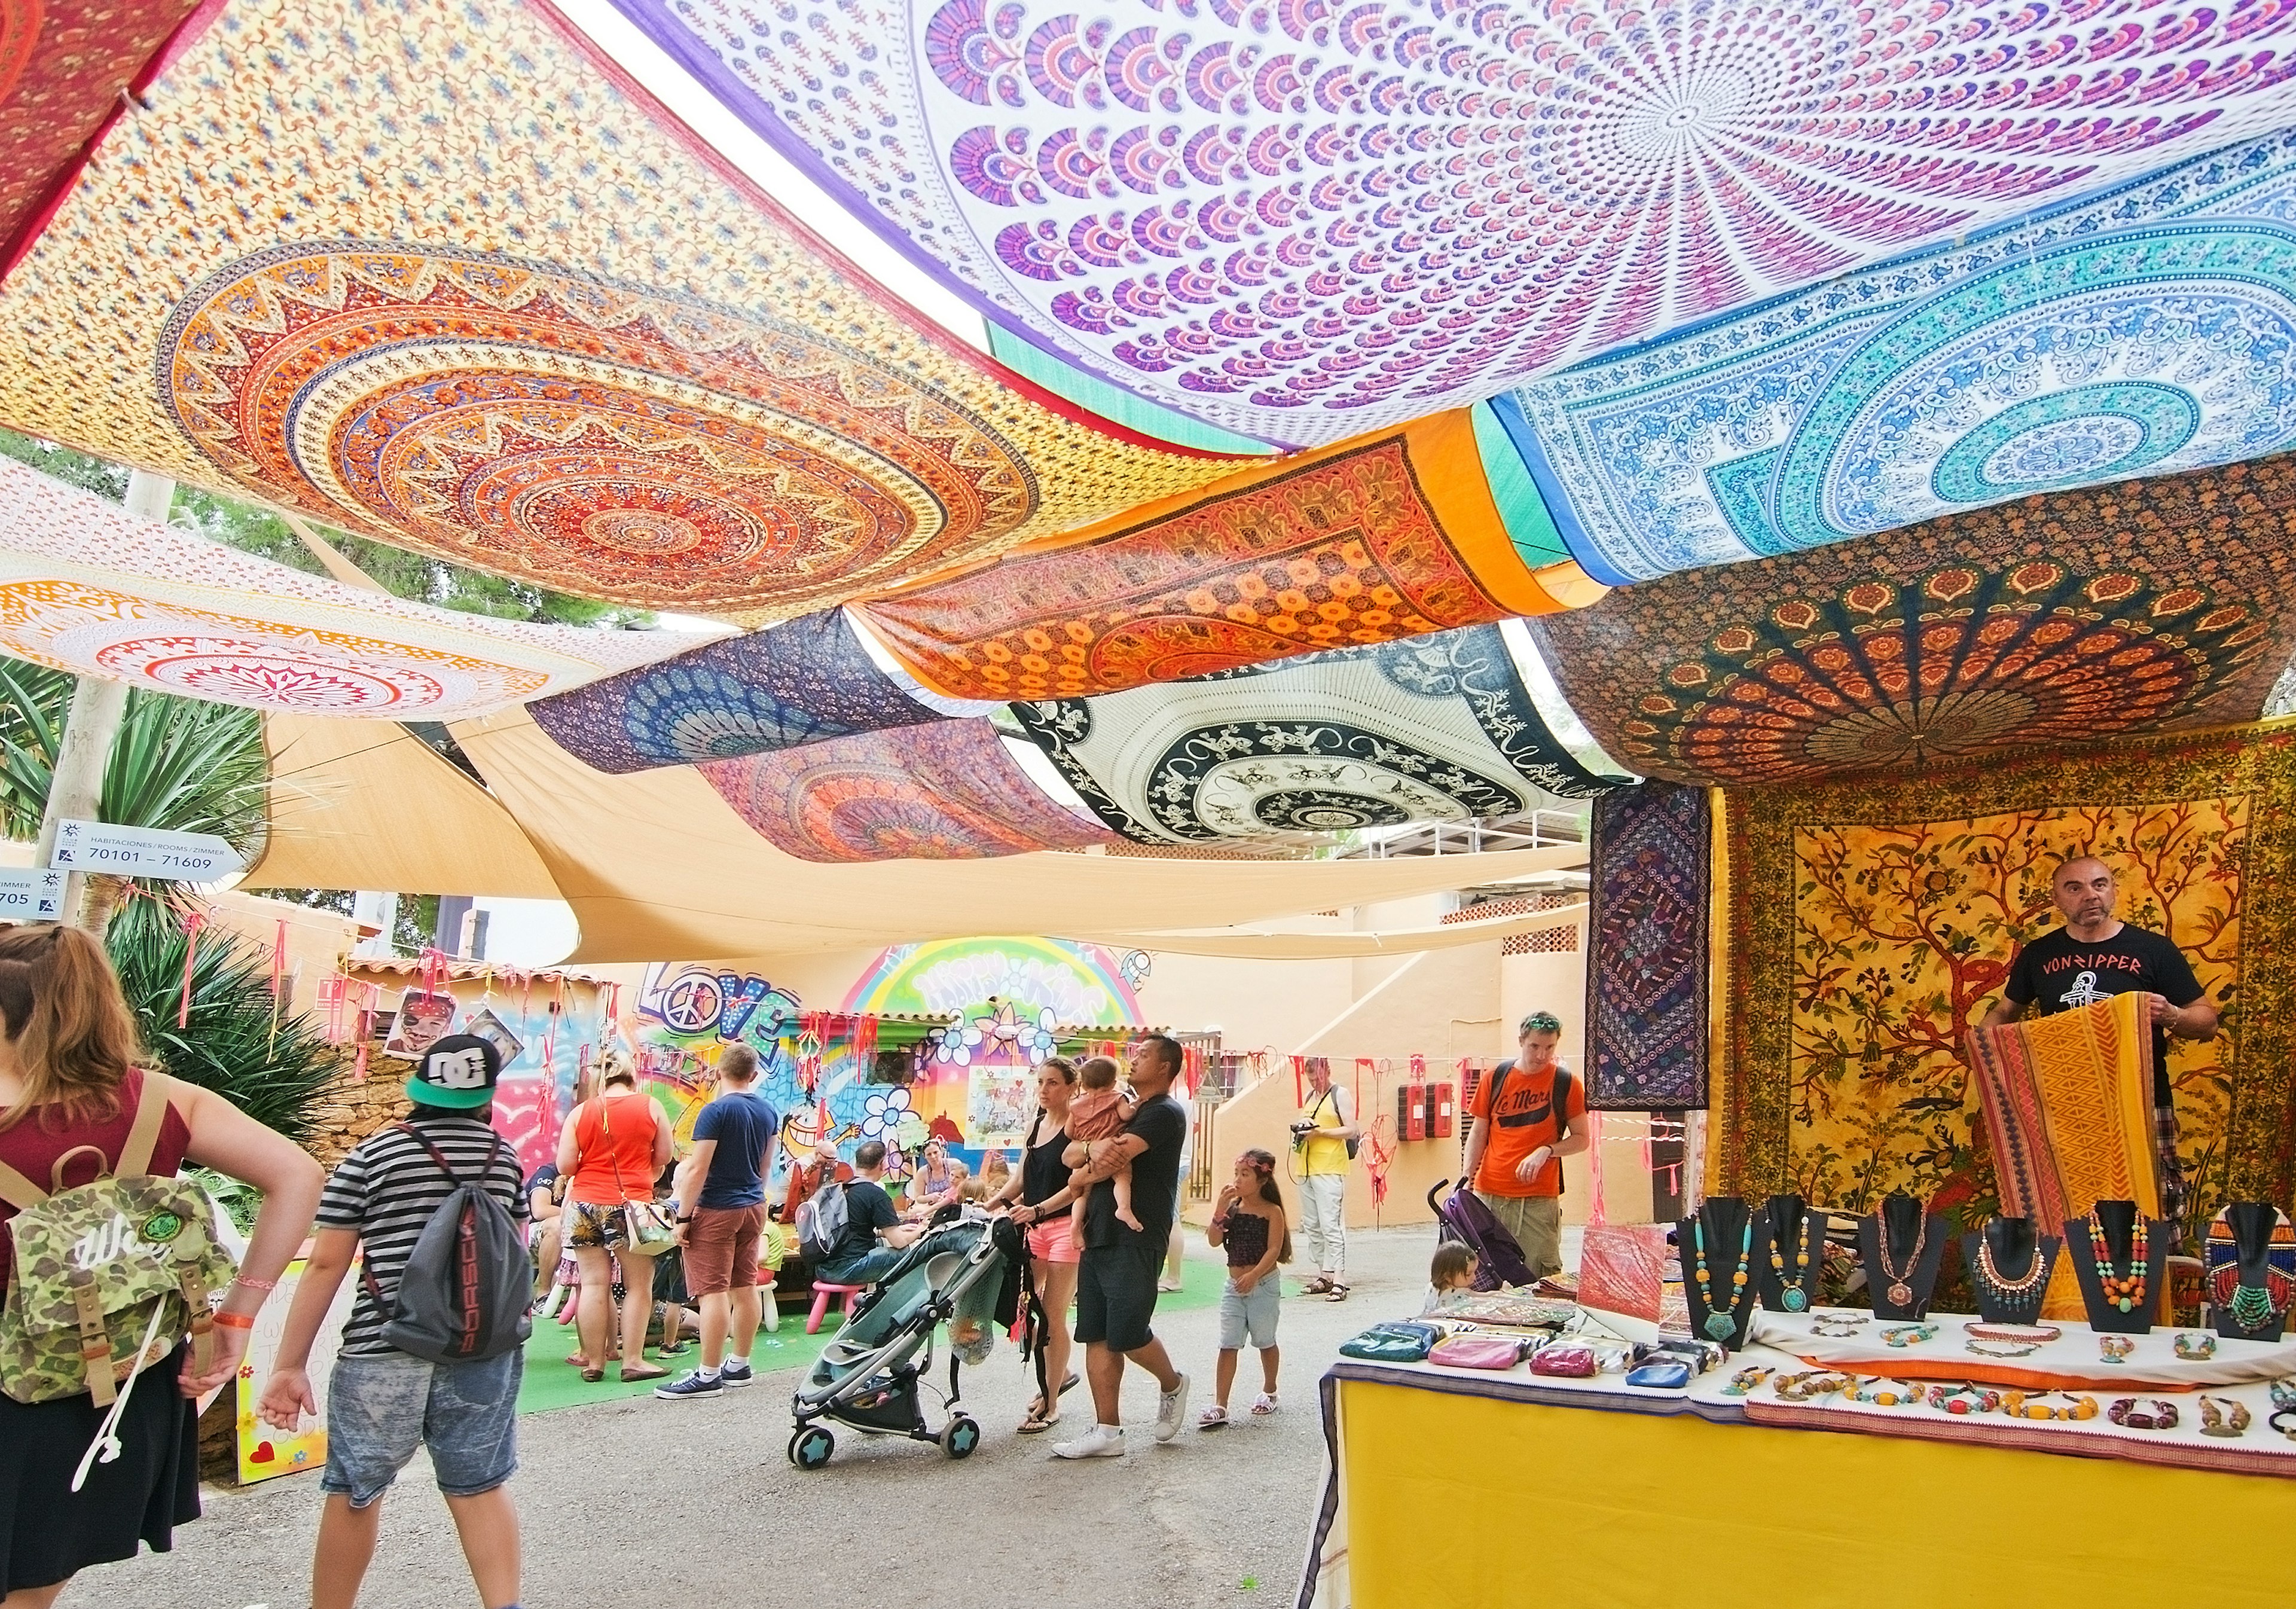 Es Canar, Ibiza, Balearic islands, Spain - October 26, 2016: Hippy Market people and vendors with ceiling made of colorful large fabric cloths on an overcast autumn day in October.